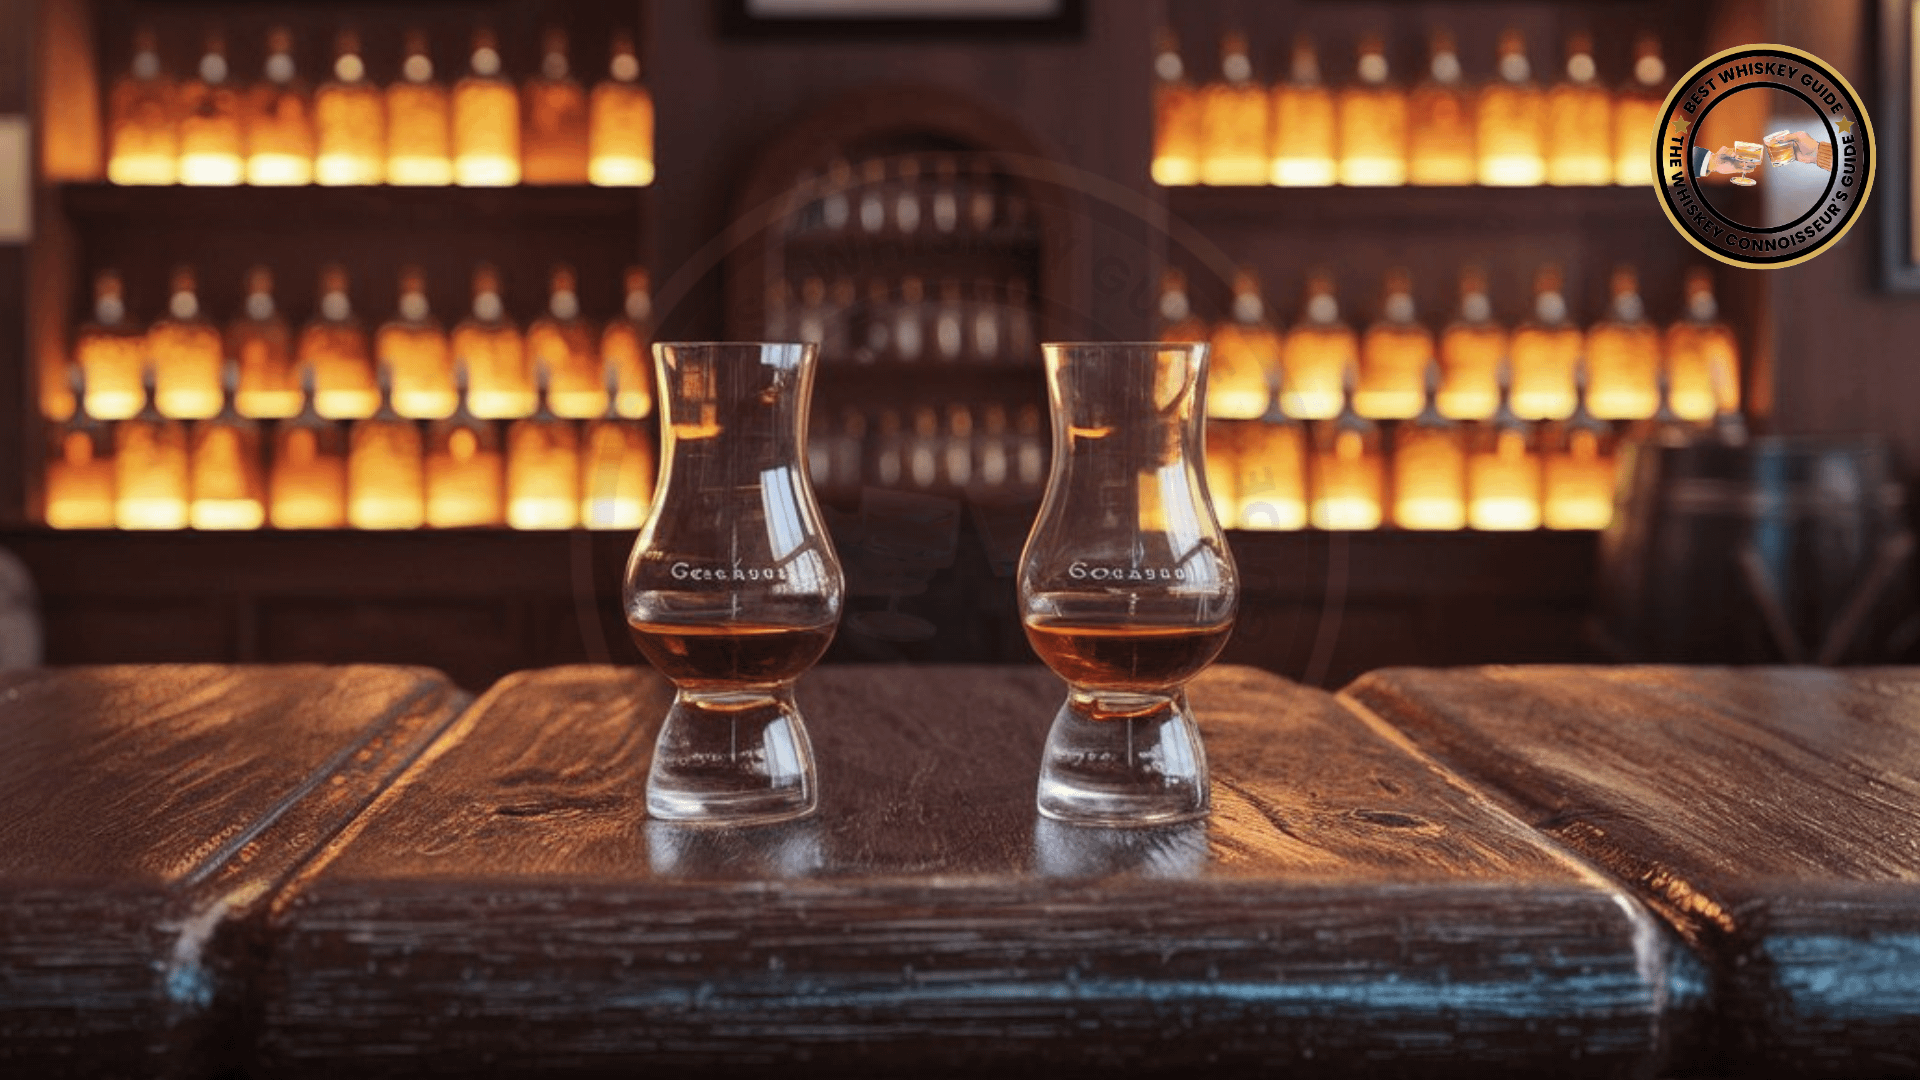 The Wee Dram: A Cultural Icon in the World of Whisky